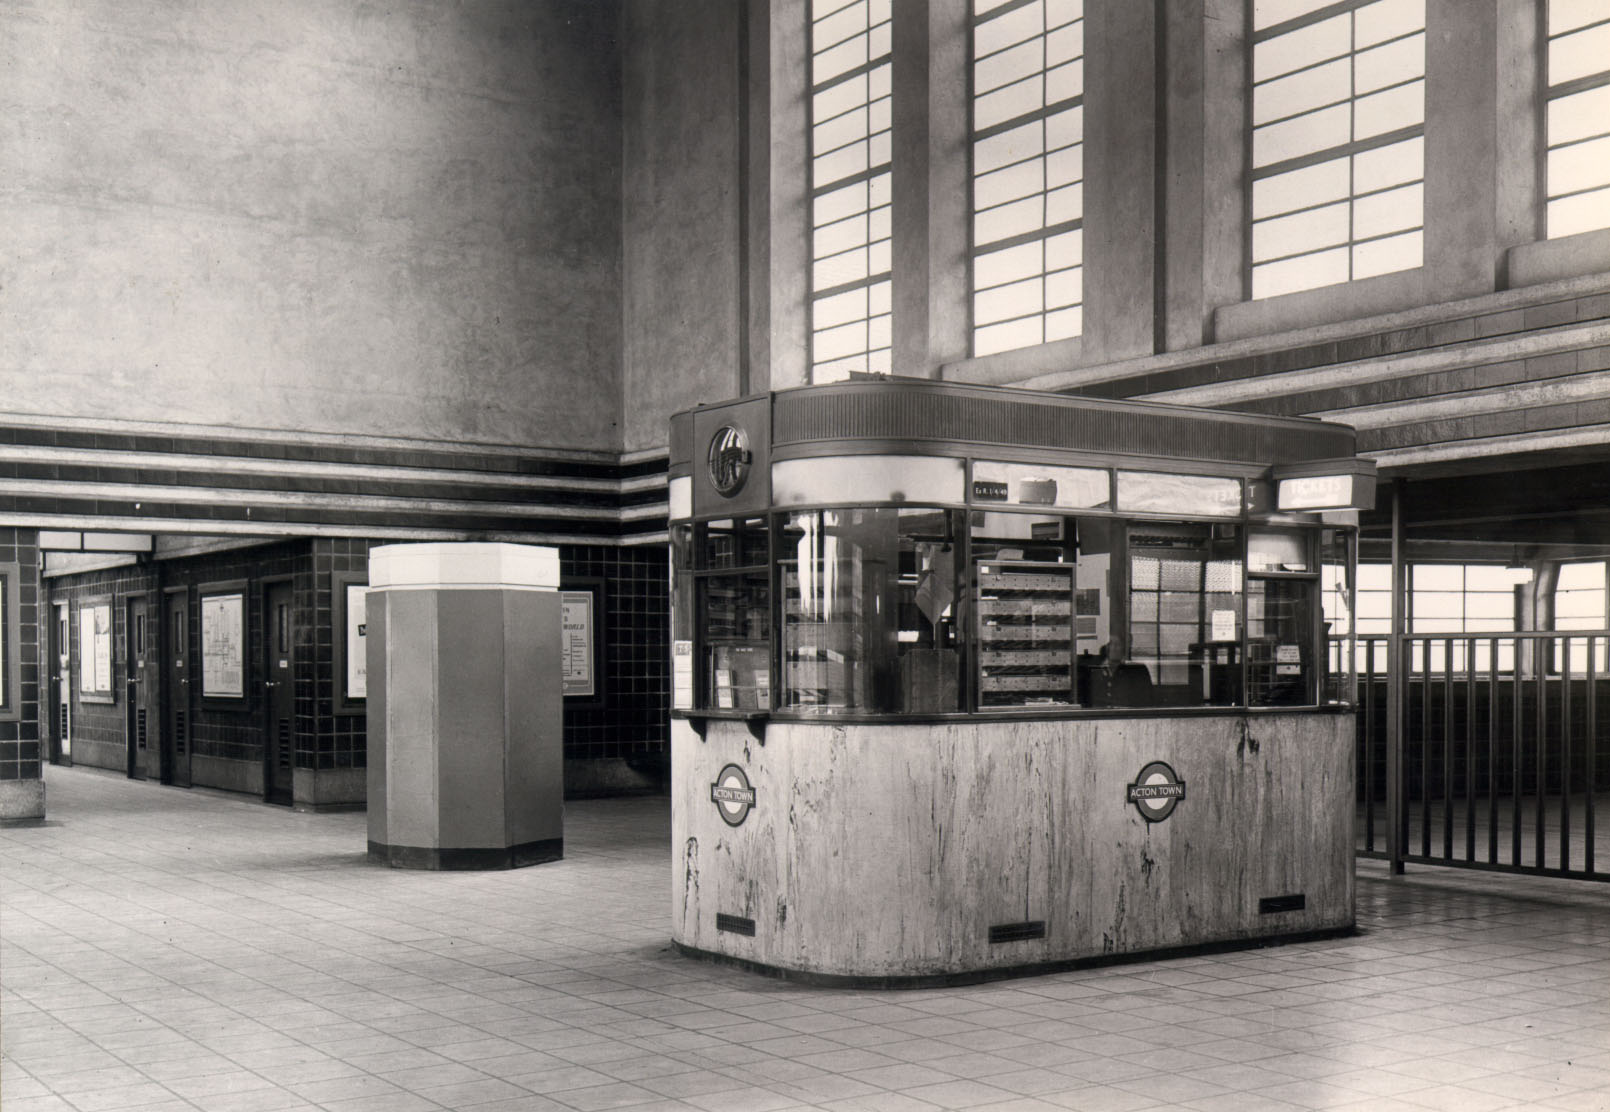 Black and white photo of Acton Town Underground Station ticket booth.